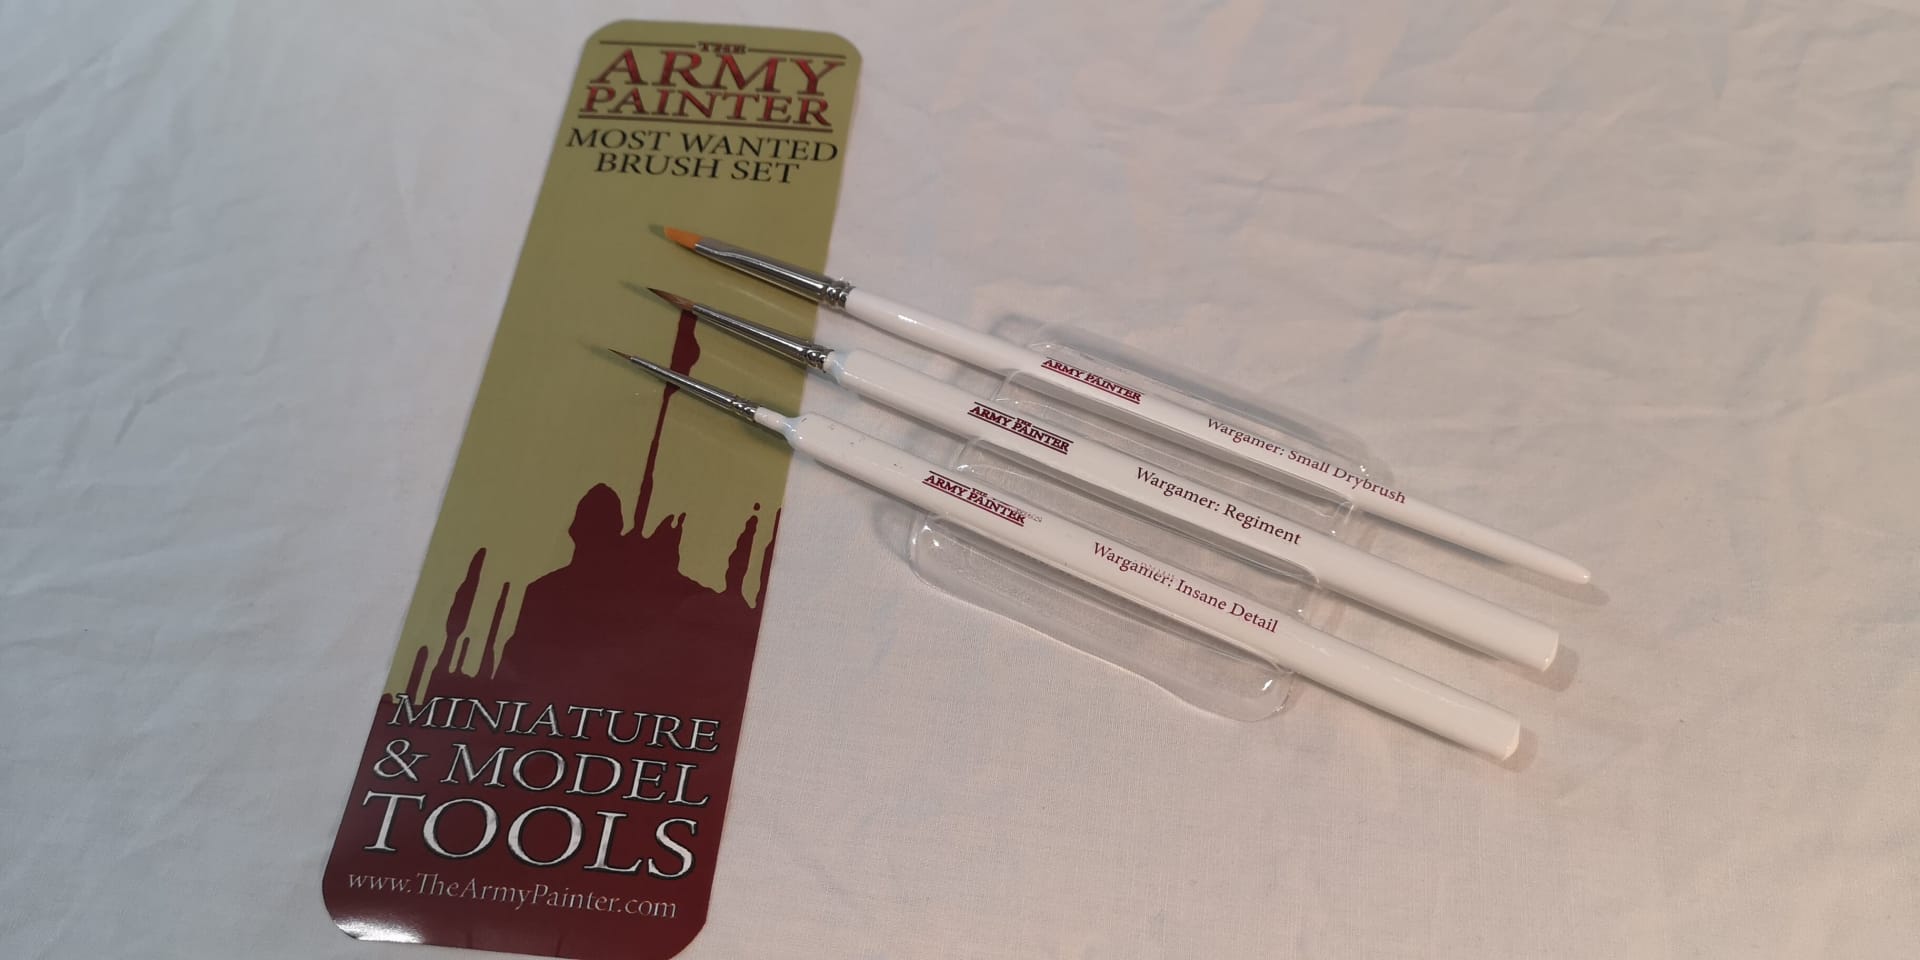 The Army Painter Most Wanted Brush Set.